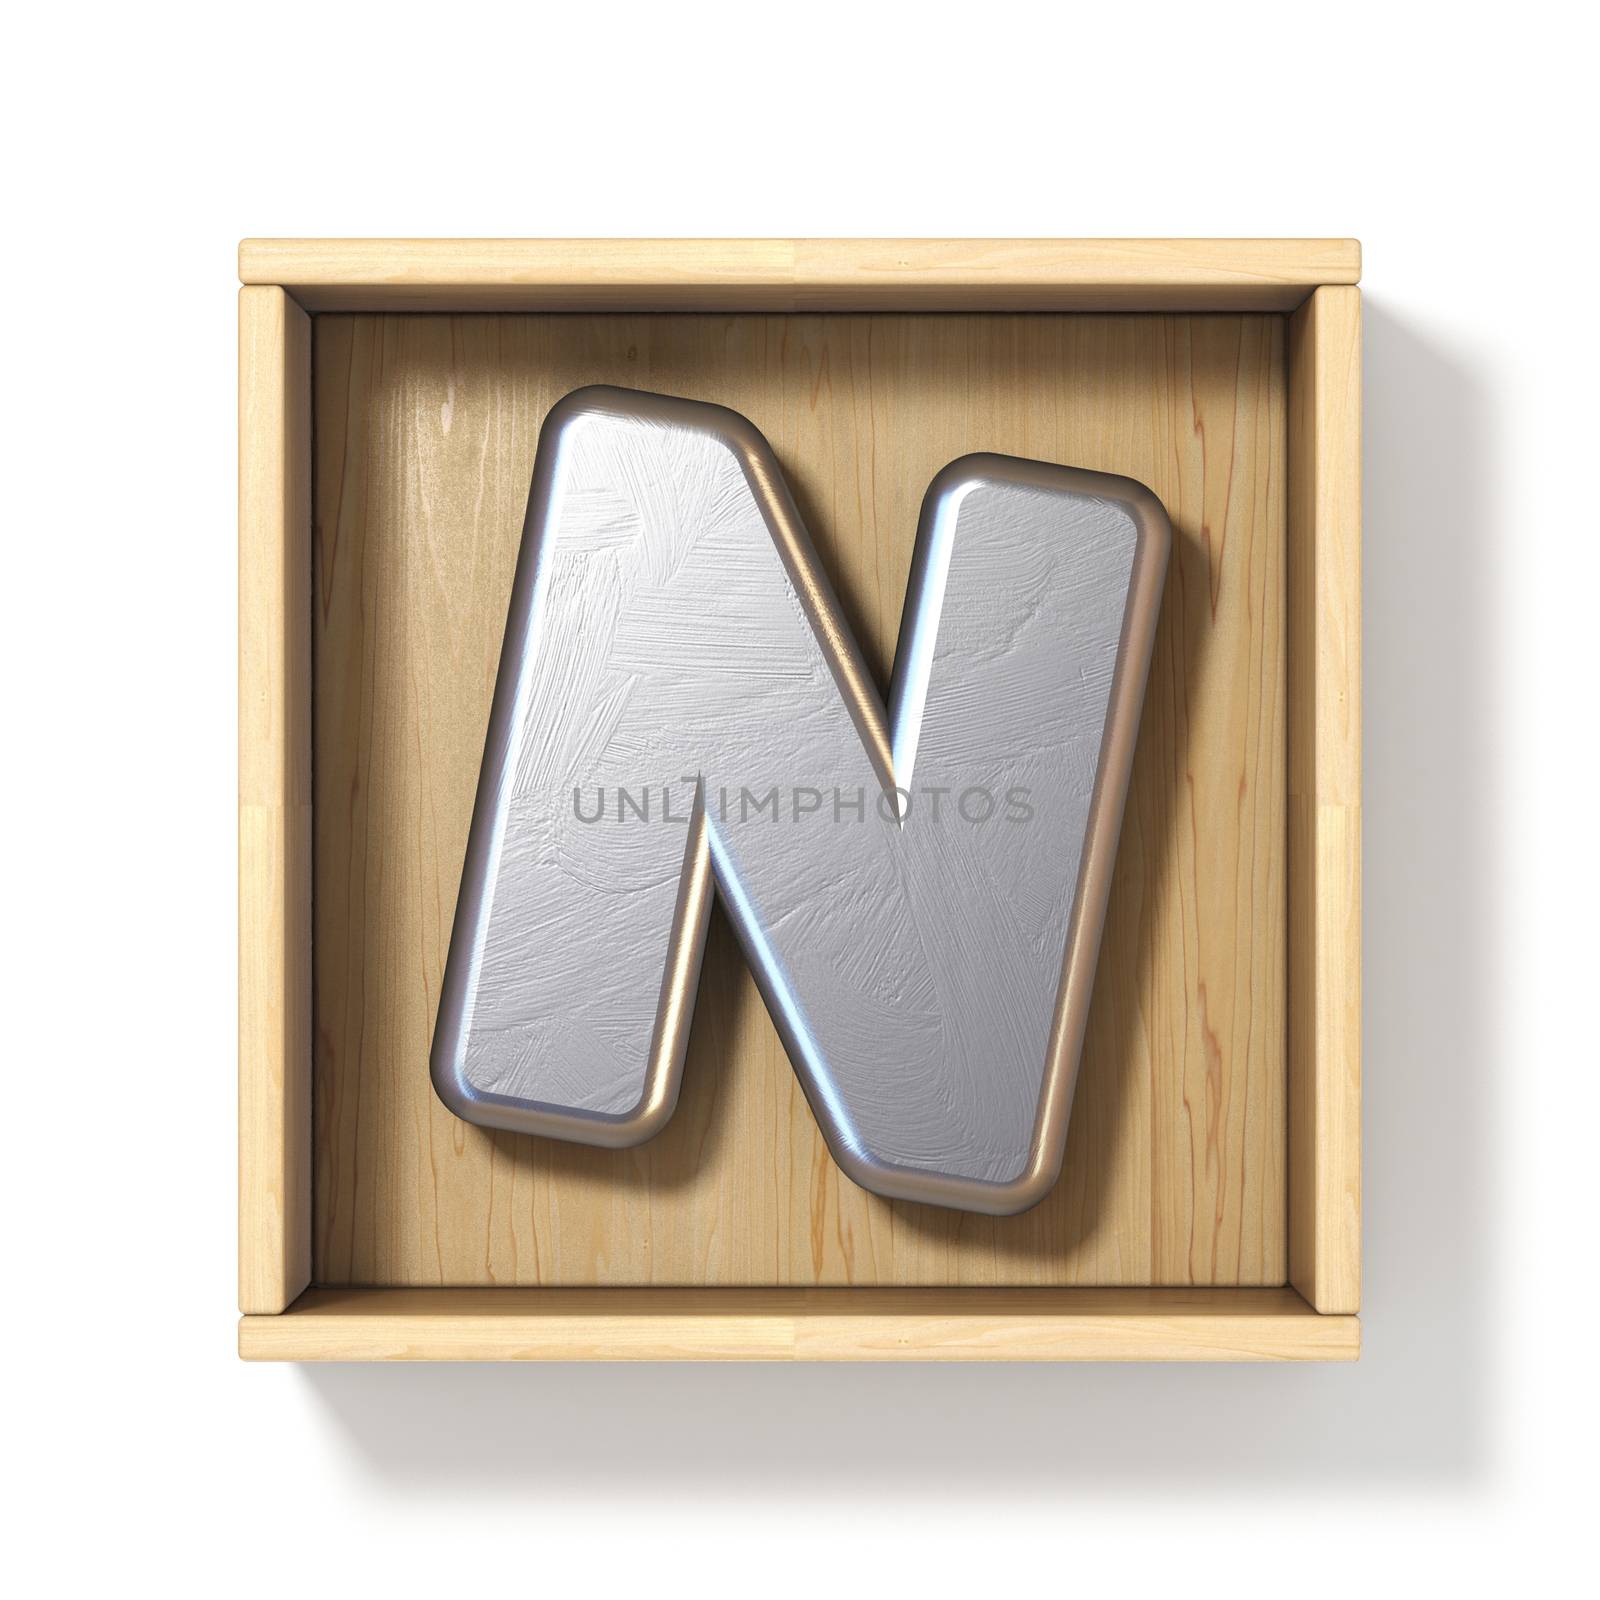 Silver metal letter N in wooden box 3D render illustration isolated on white background